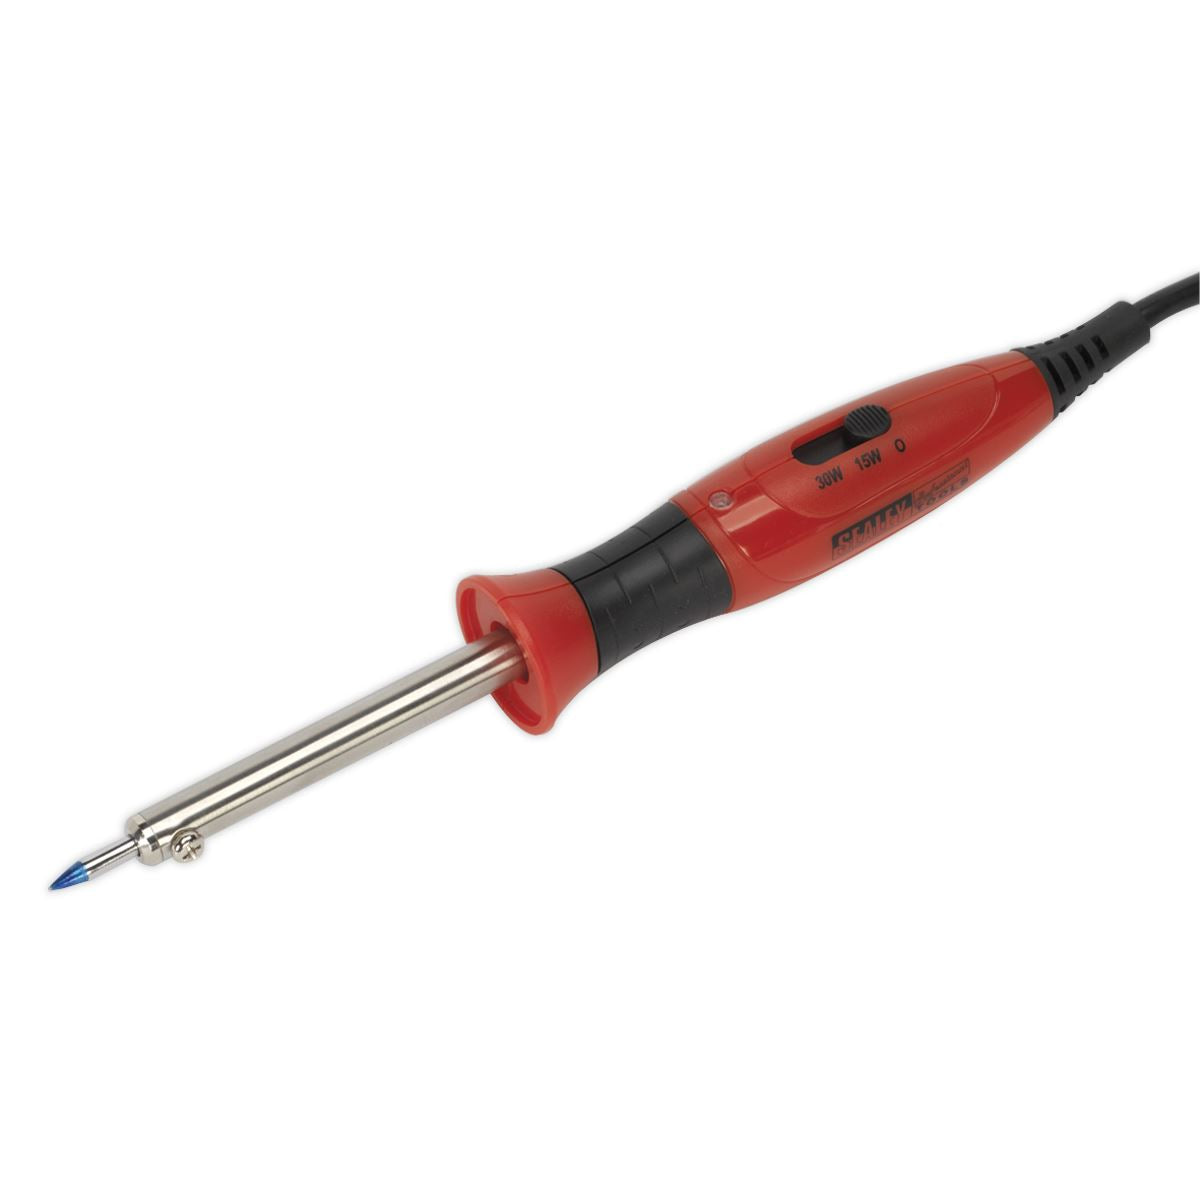 Sealey Premier Professional Soldering Iron with Long-Life Tip Dual Wattage 15/30W/230V